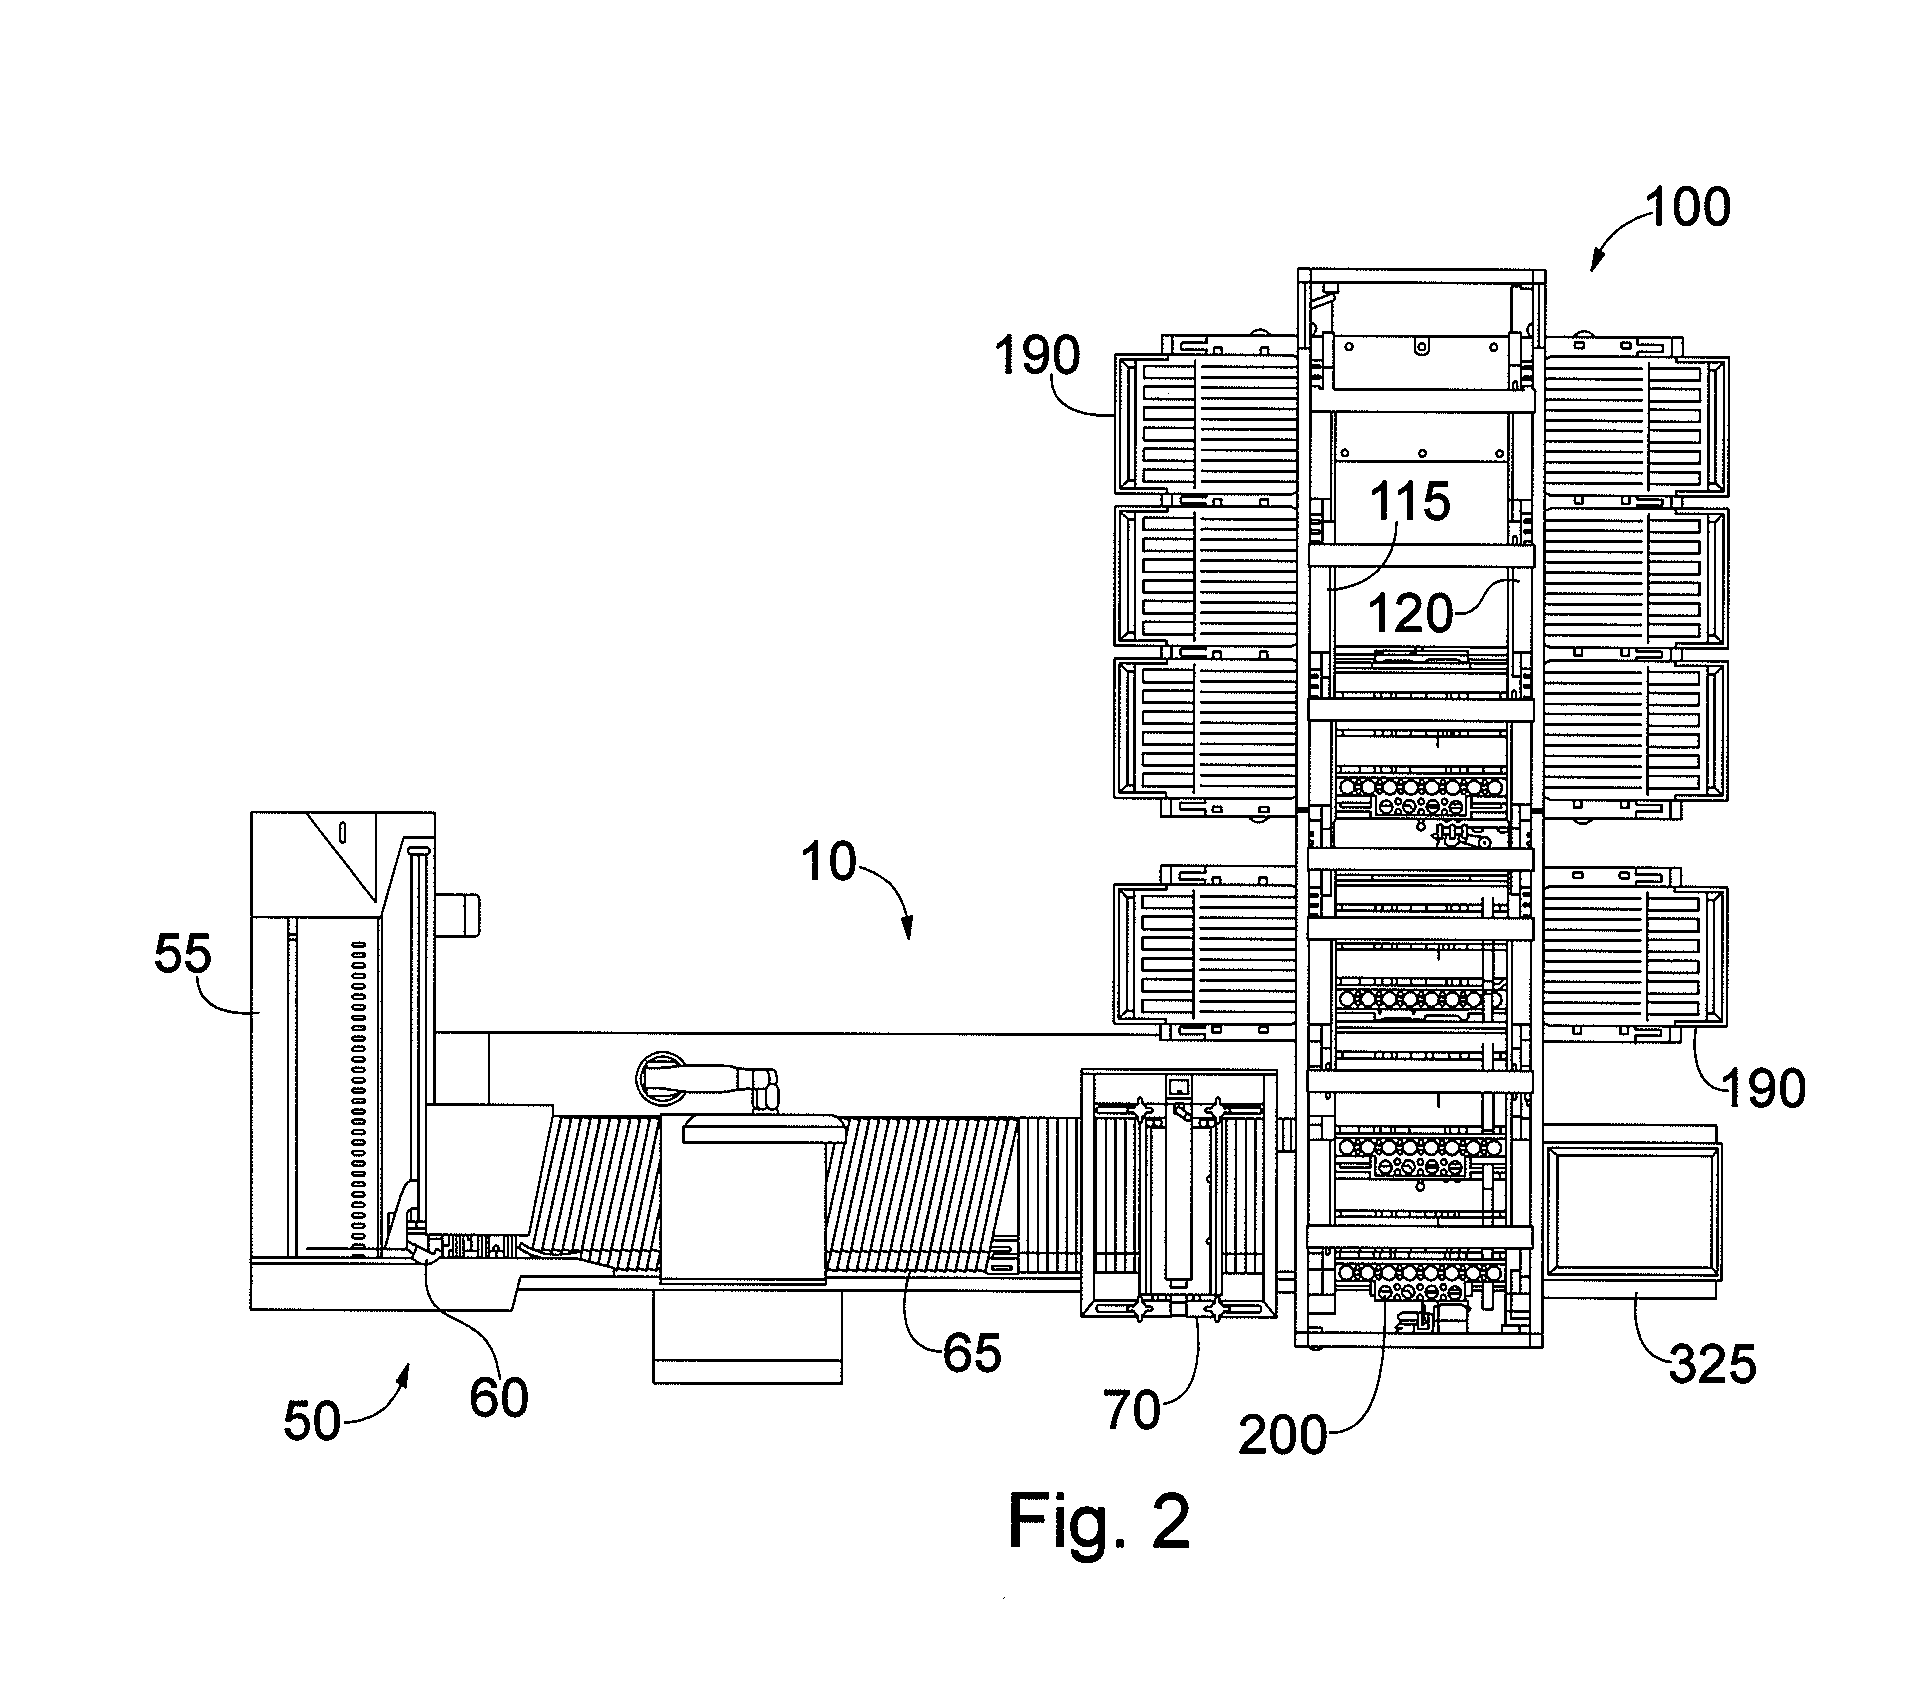 Method and apparatus for sorting items